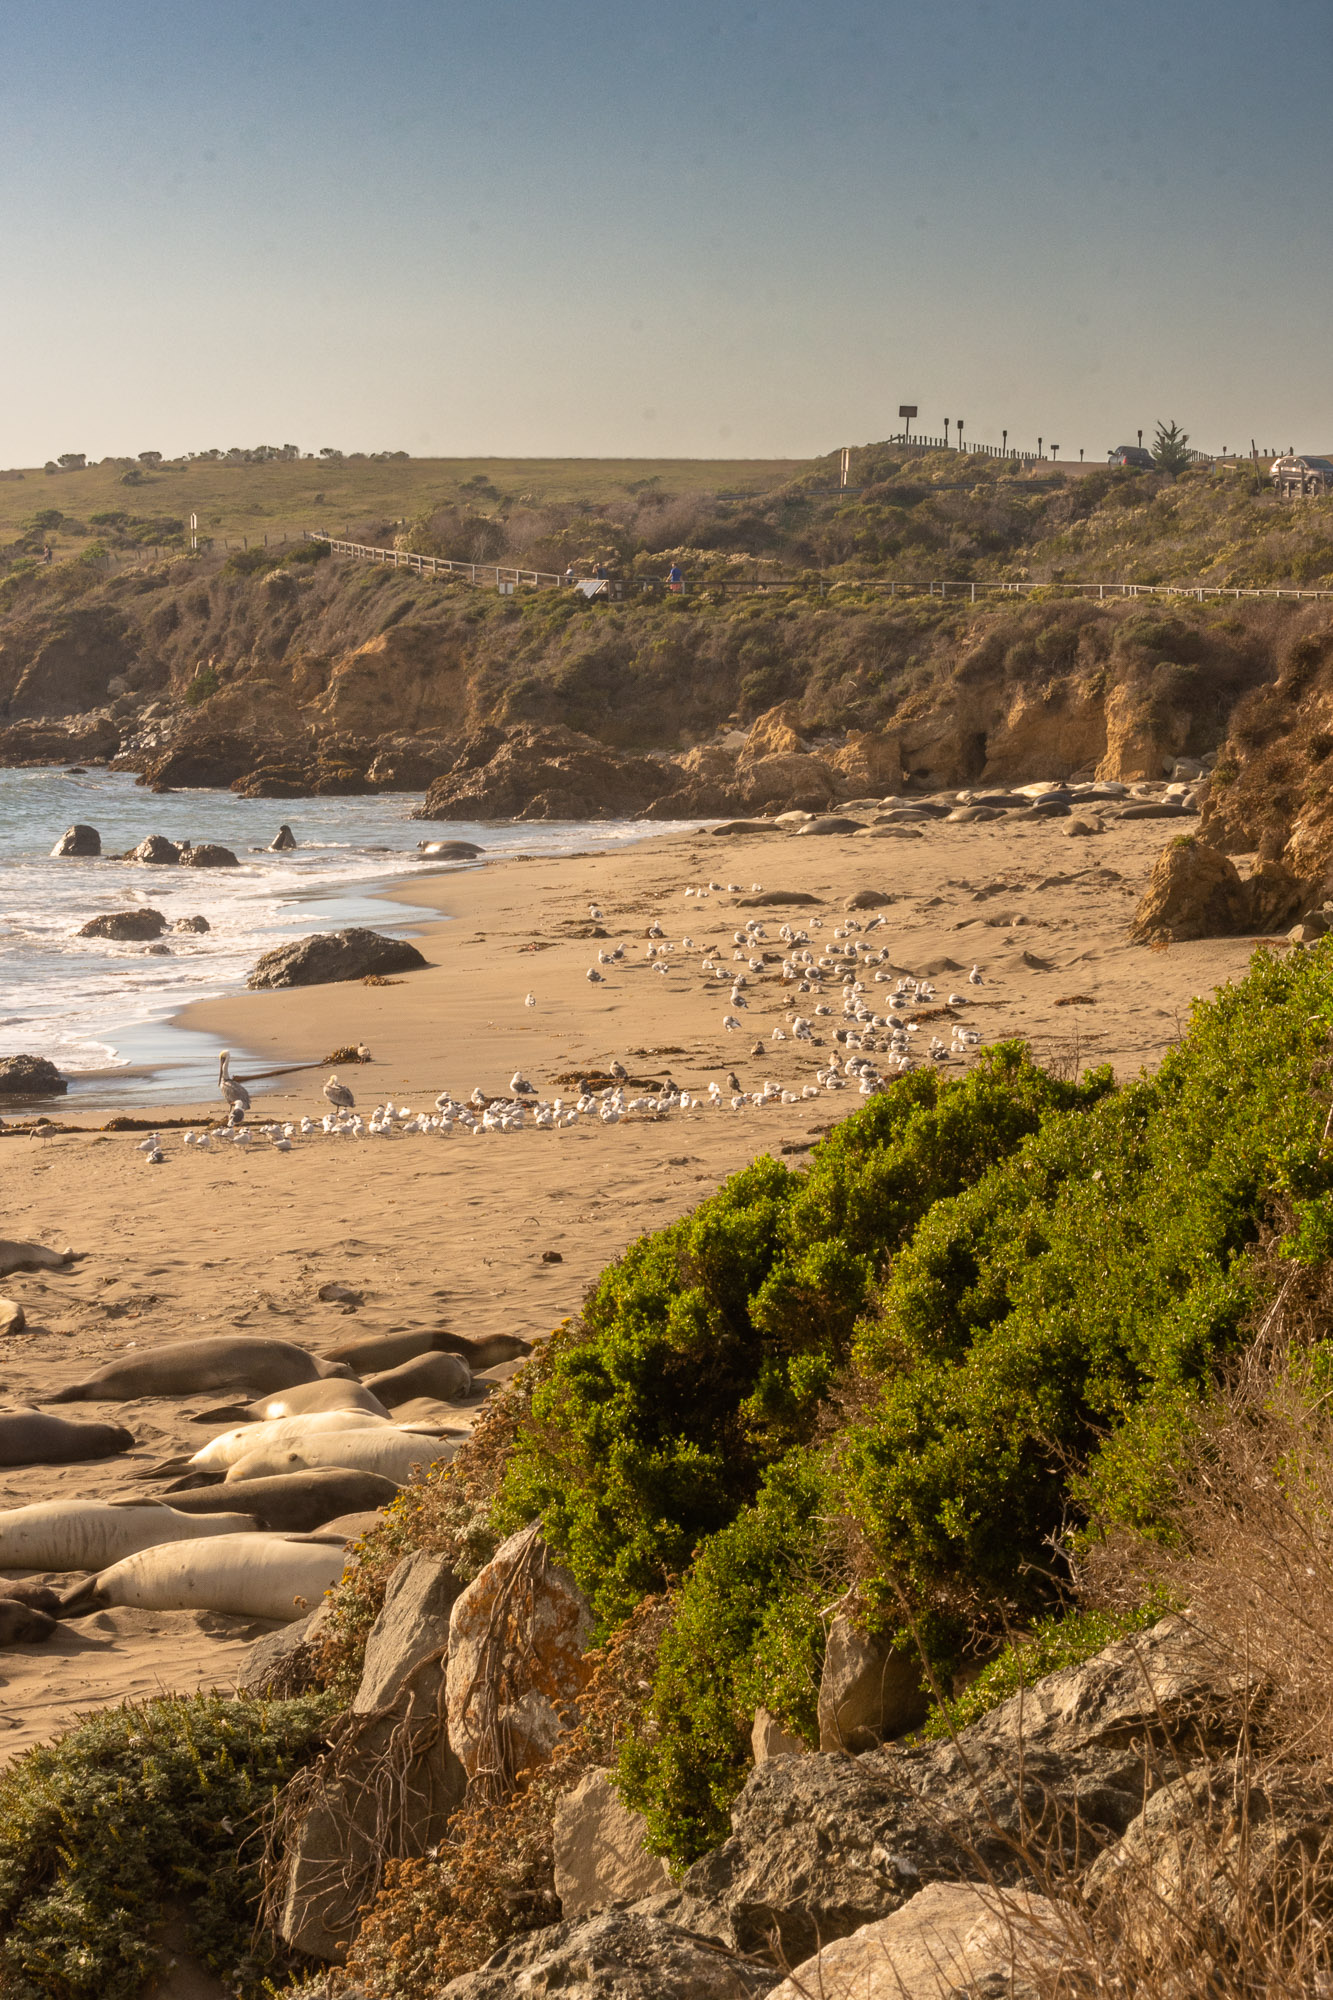 Not only are there (literally) tons of elephant seals, but there are plenty of other guests.